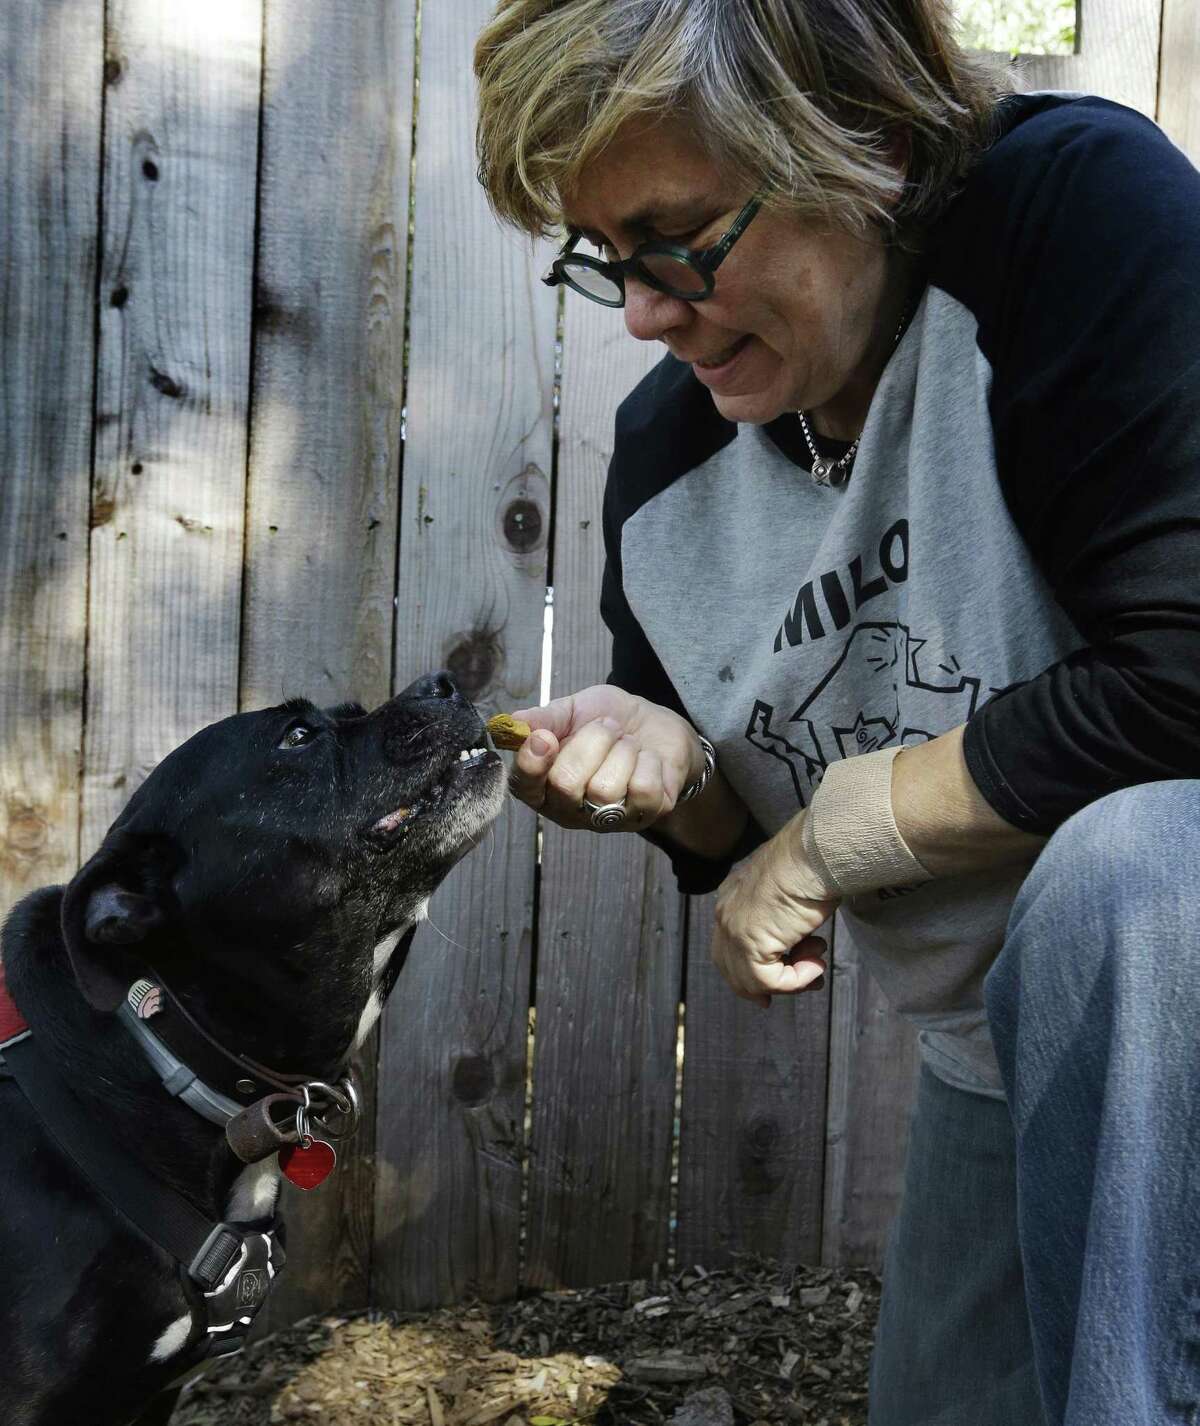 Lynne Tingle administers a hemp-based biscuit as a medicinal treatment to a dog at the Milo Foundation pet adoption center in Richmond, Calif. Most of these pet products, which aren’t regulated, contain cannabidiol or CBD, a chemical compound found in cannabis that doesn’t get pets or humans high. They contain little or no tetrahydrocannabinol or THC, the cannabis compound known for its psychoactive effects.